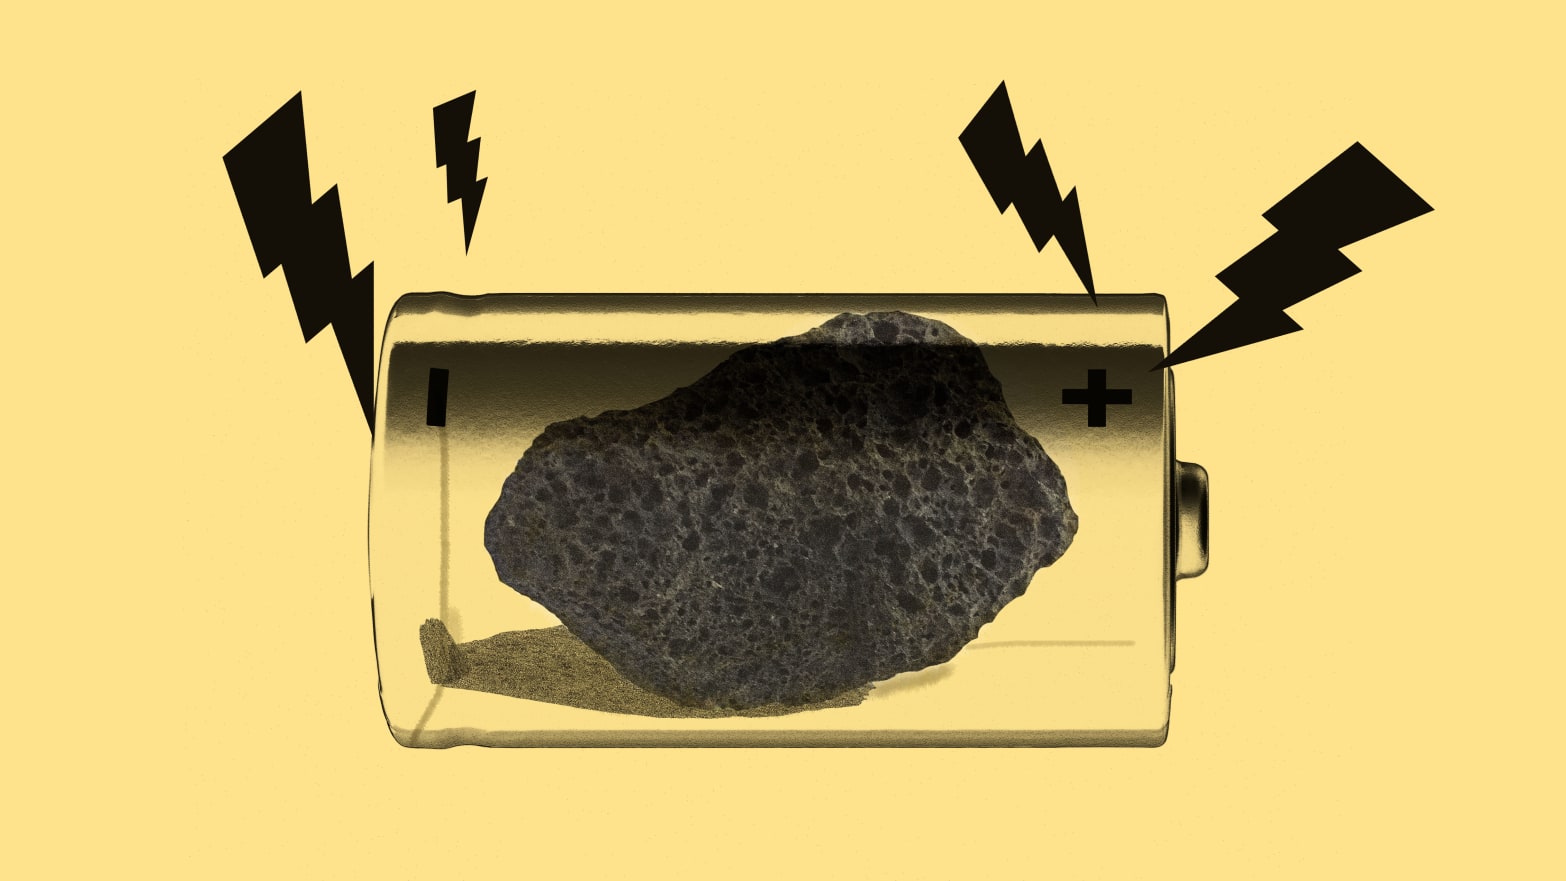 A photo illustration showing a rock as a battery.